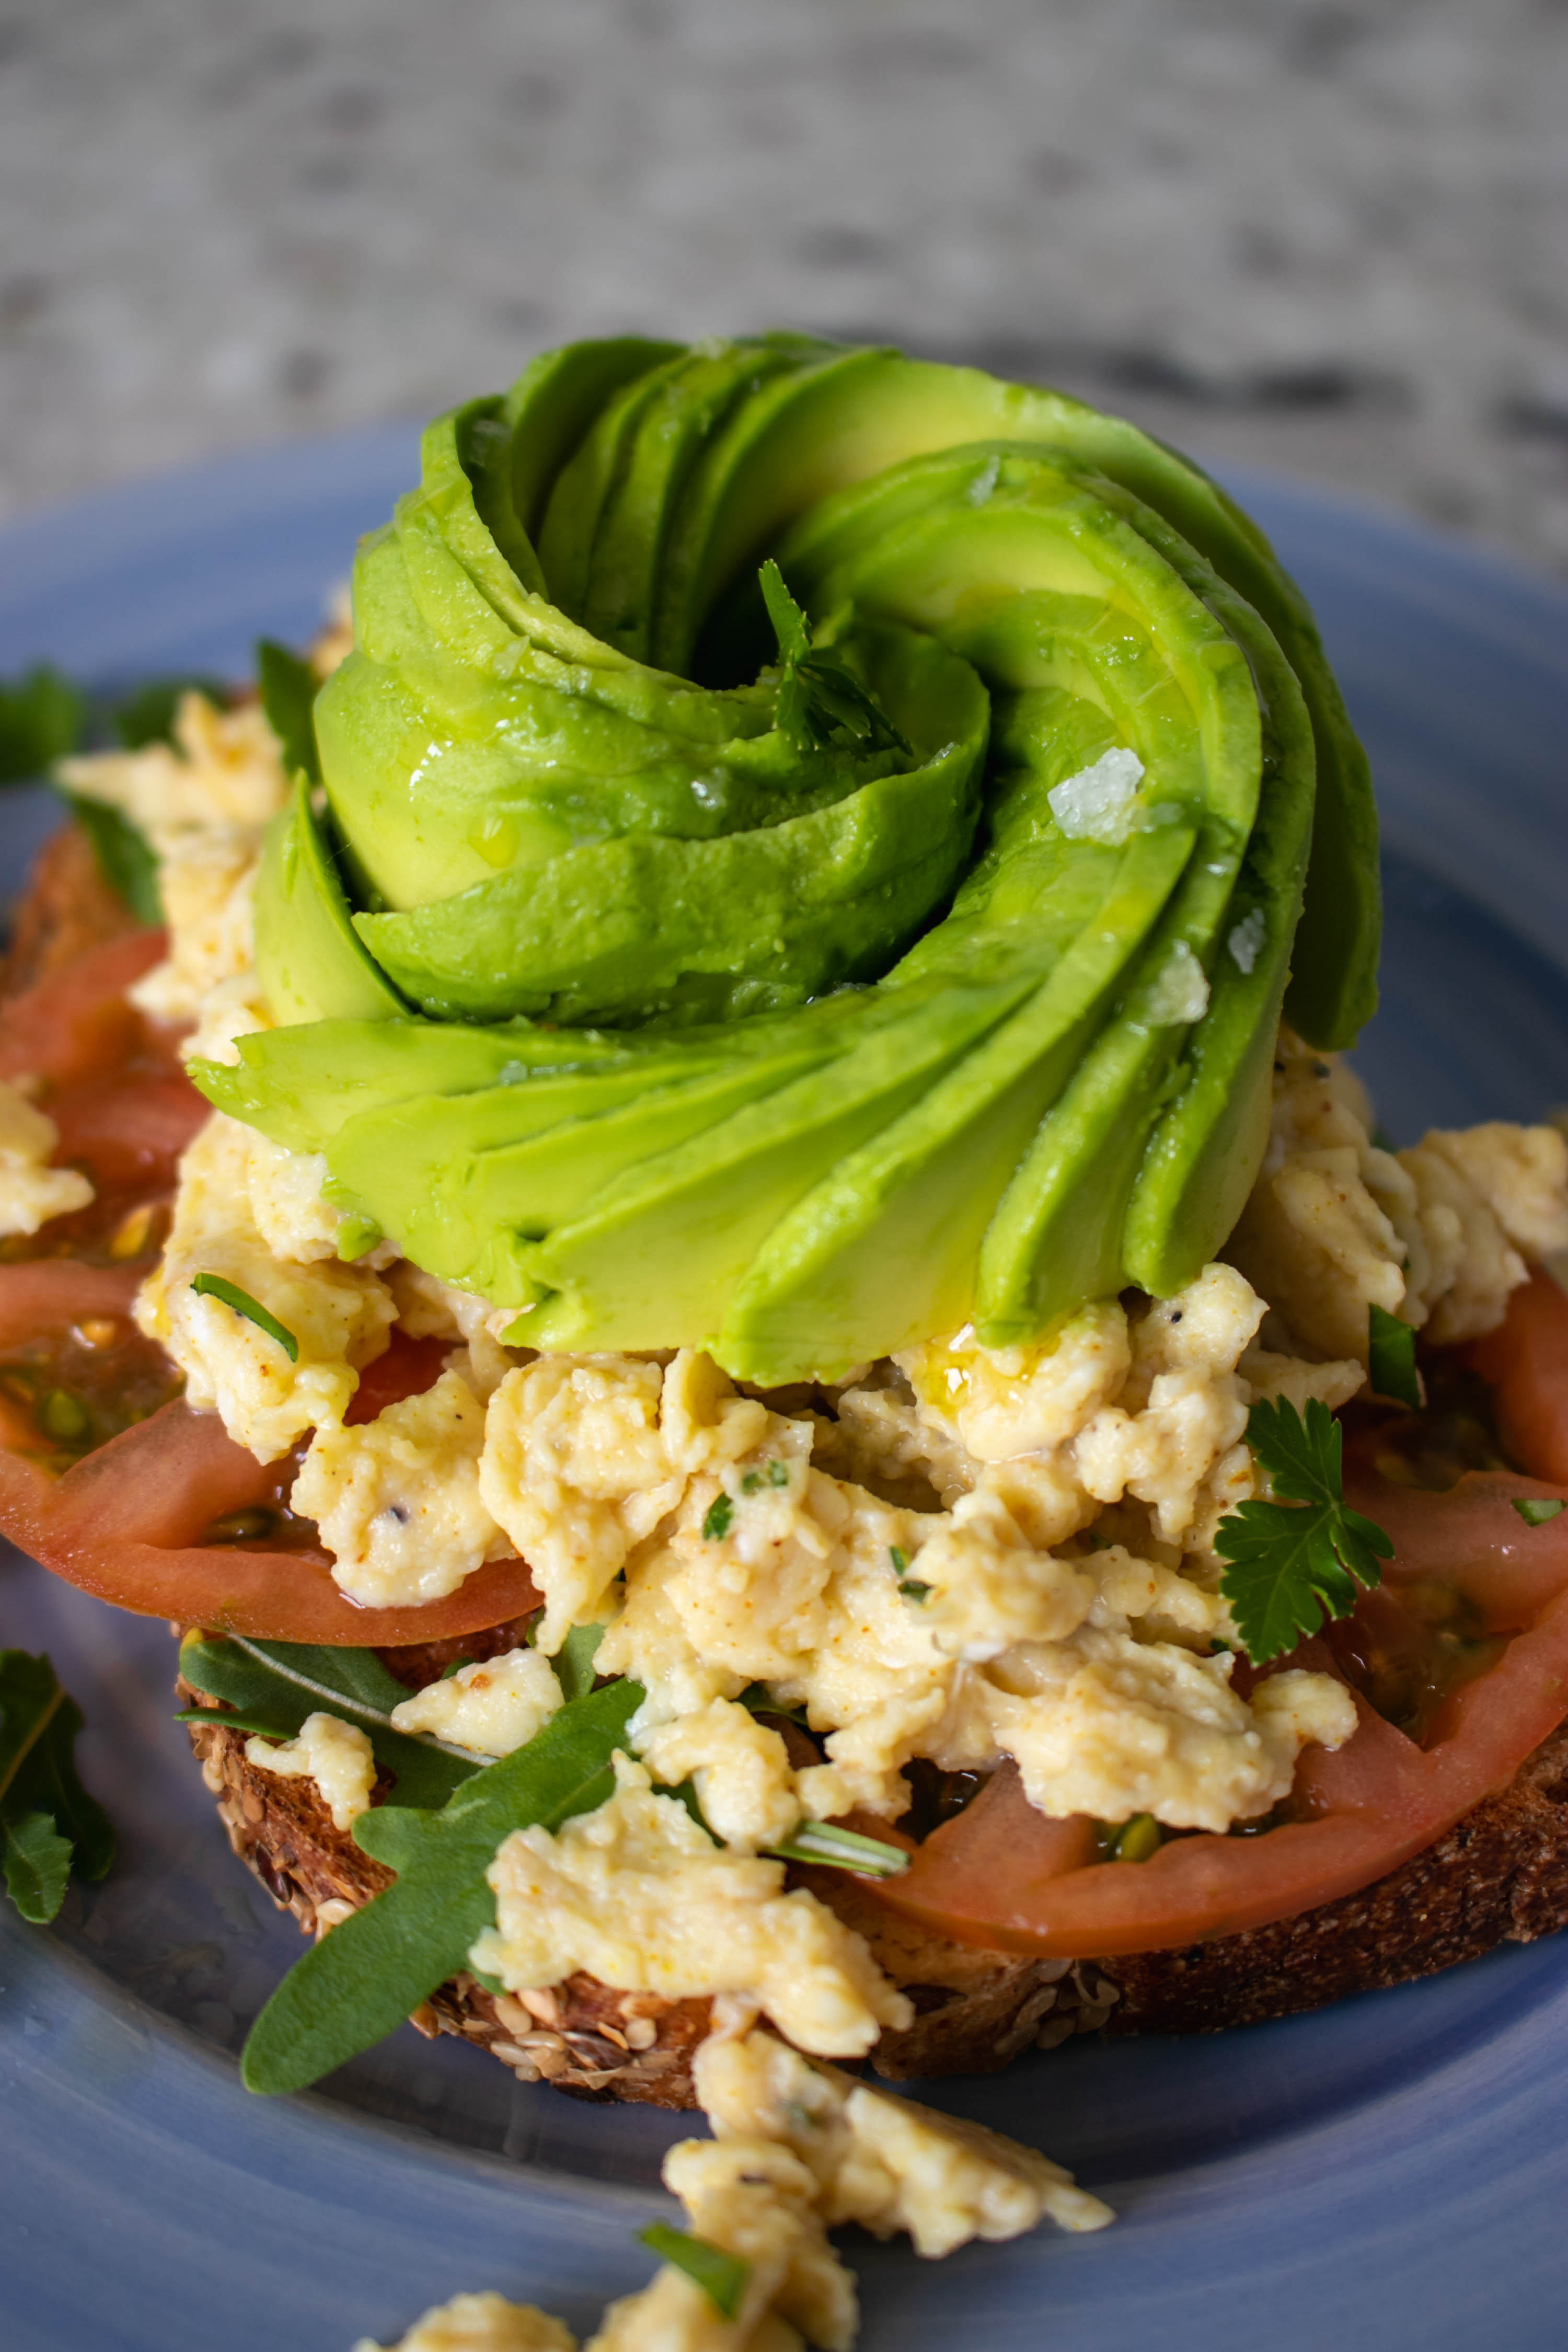 Avocado toast with scrambled eggs - The Delicious plate